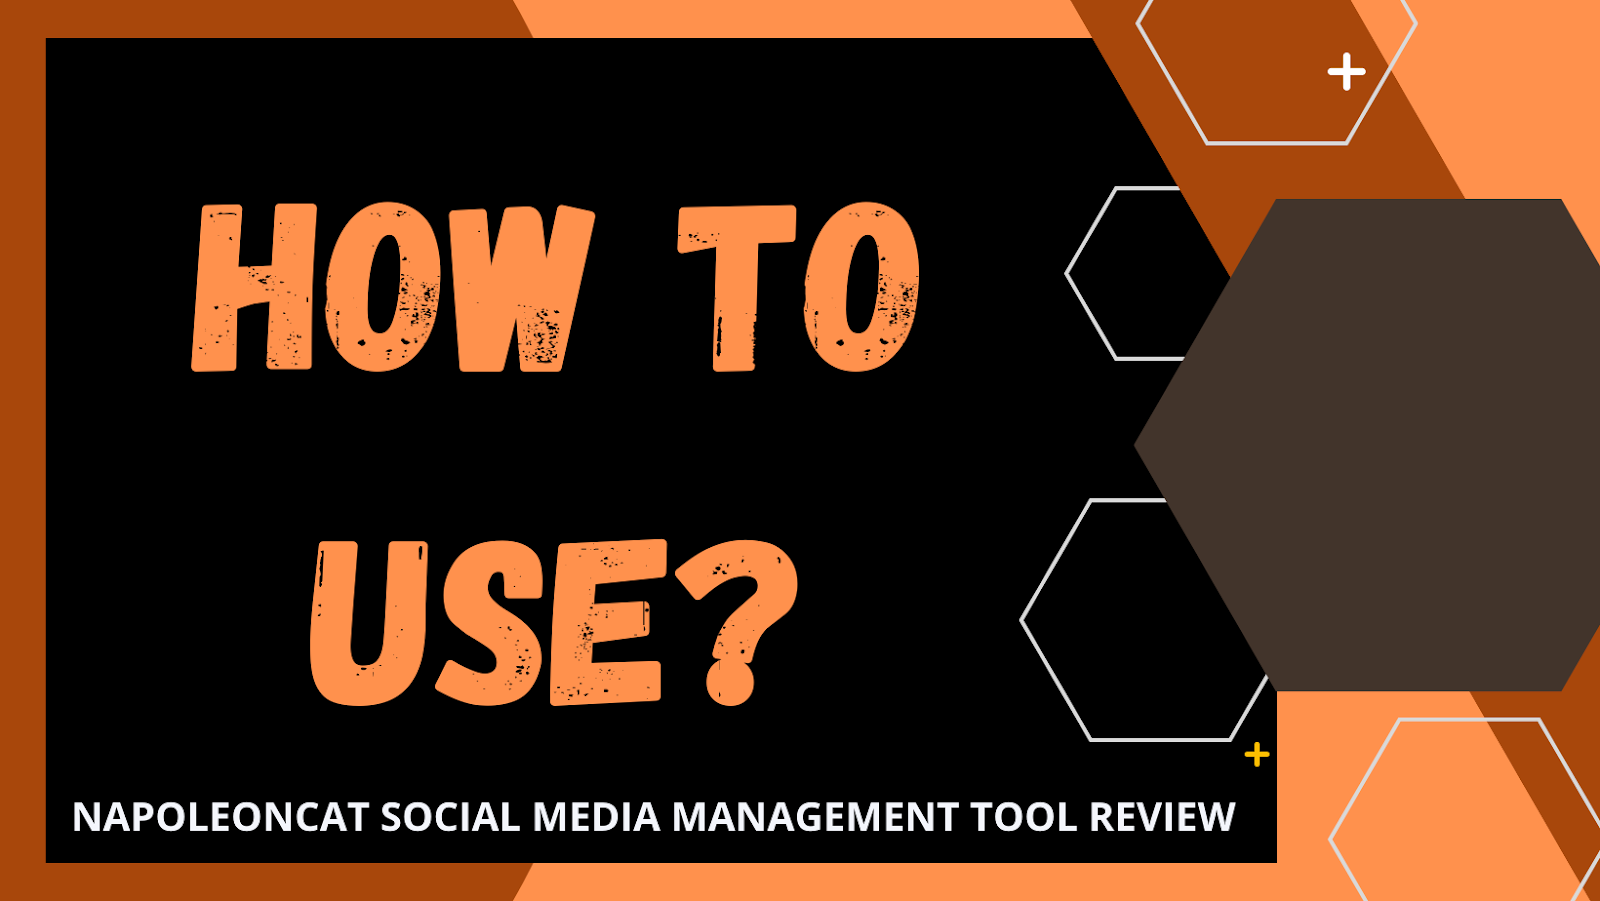 How To Use NapoleonCat Social Media Management Tool?